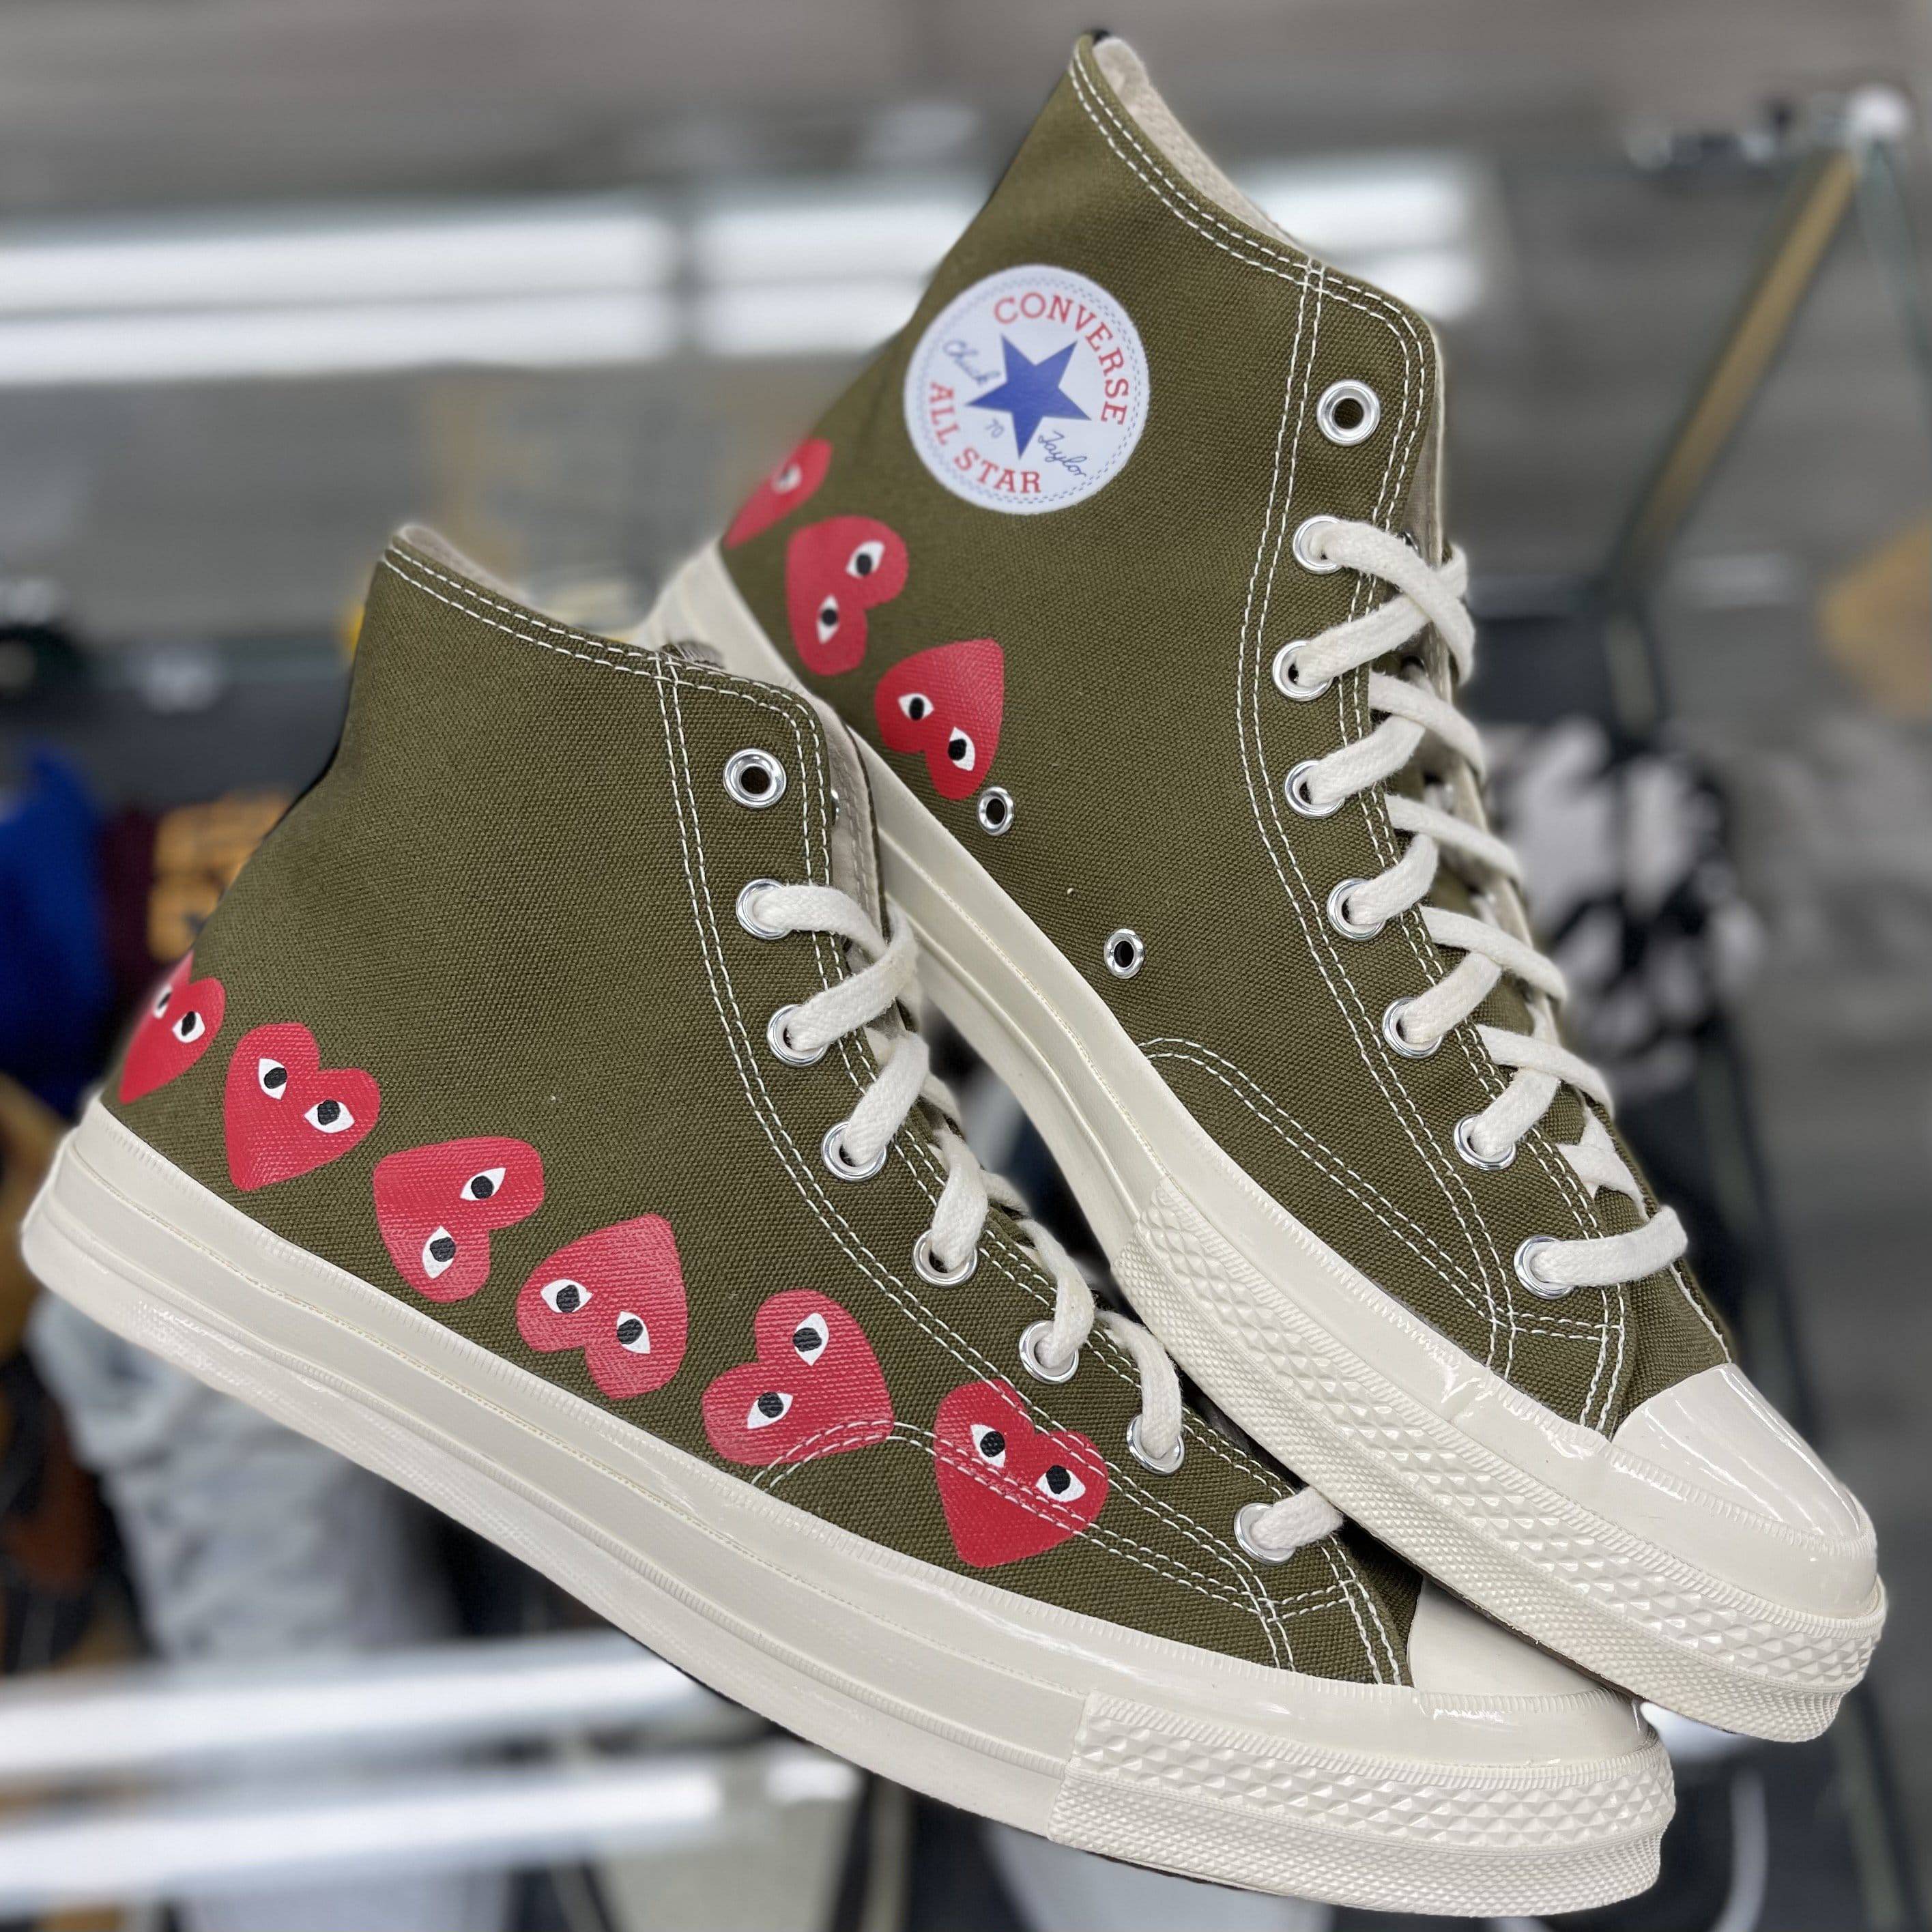 Chuck CDG “Olive” | Request